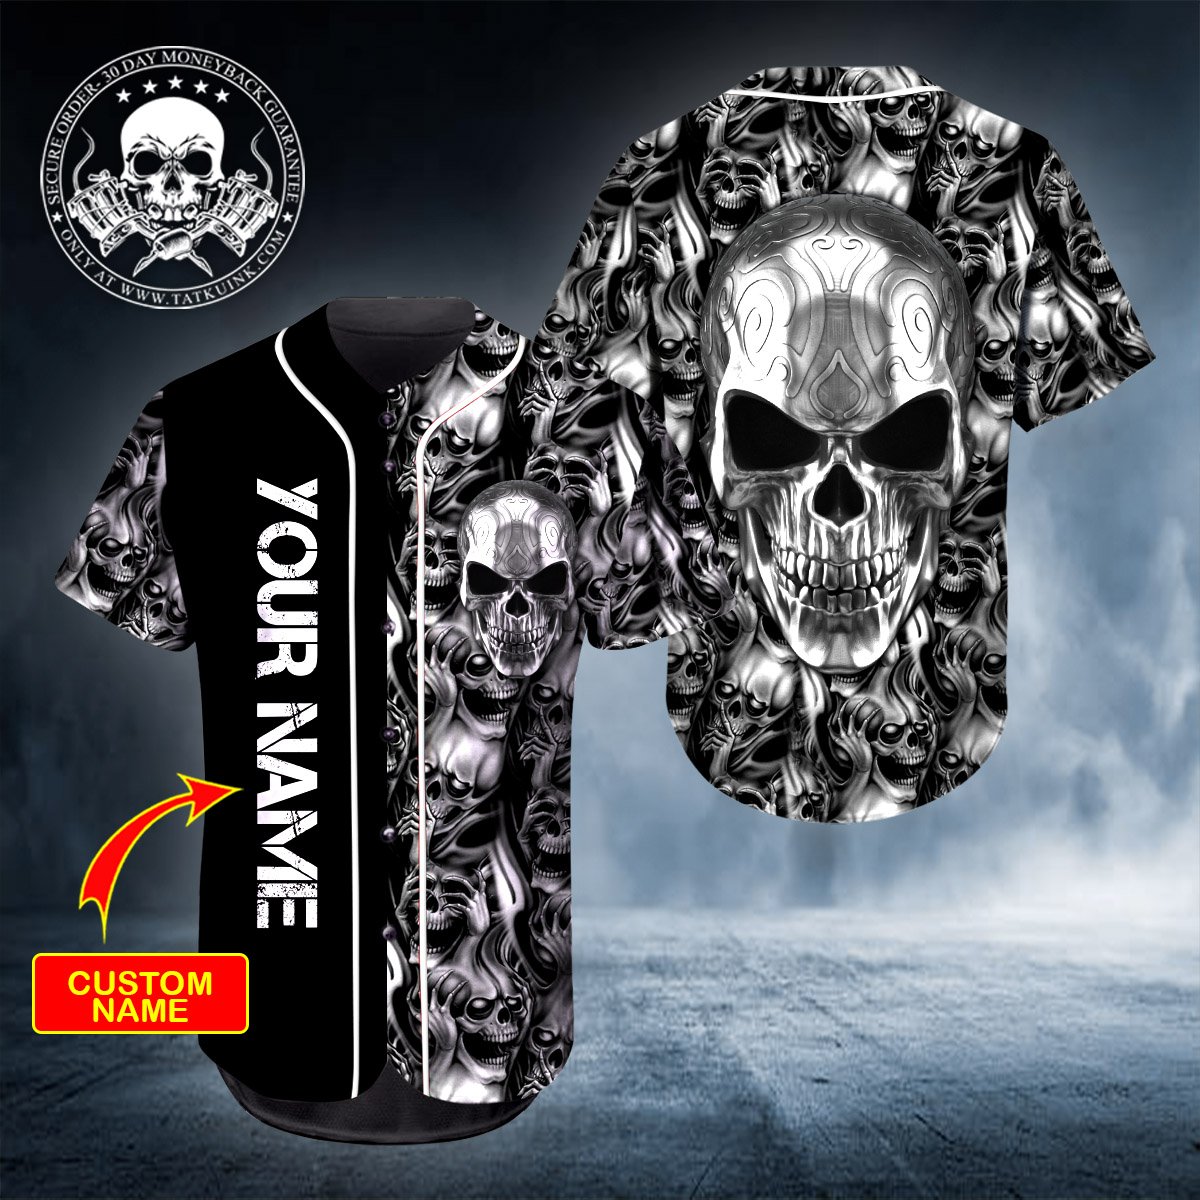 12-Ghost Silver Skull Personalized Baseball Jersey (2)